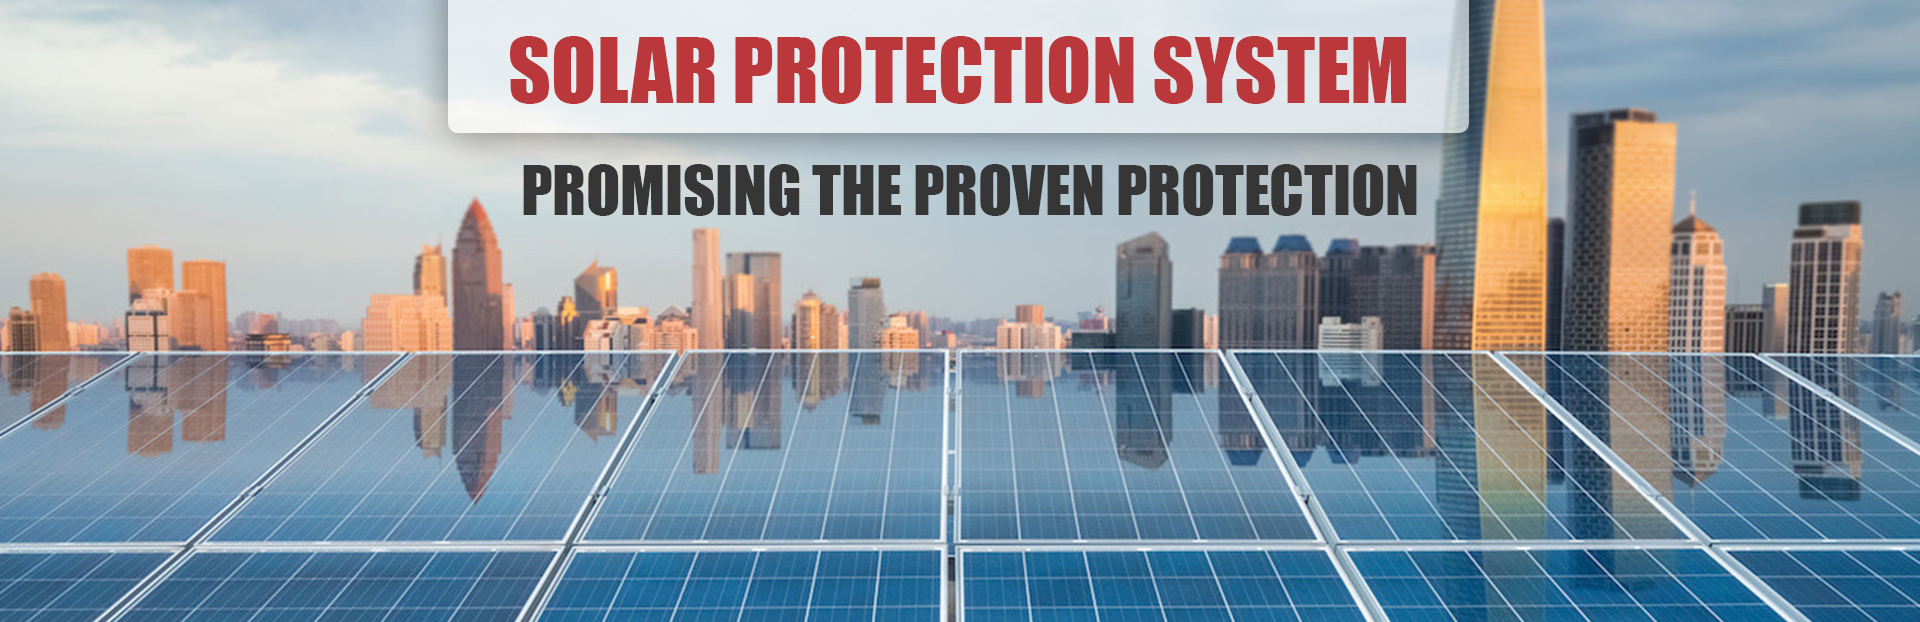 Solar Protection System